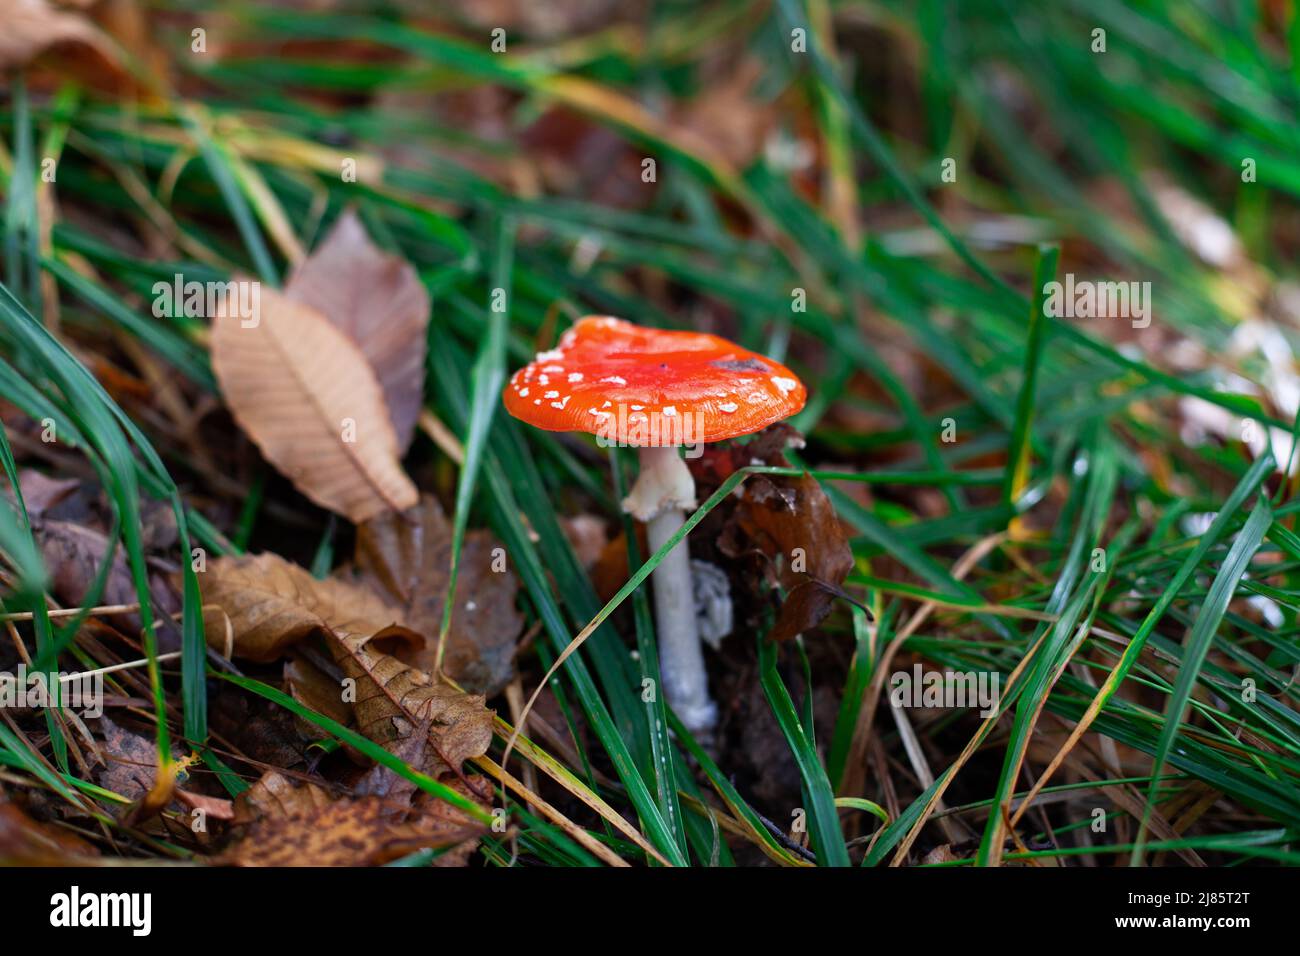 A red deadly Amanite mushroom in a wood. Closeup of a colourful poisonous mushroom. Stock Photo